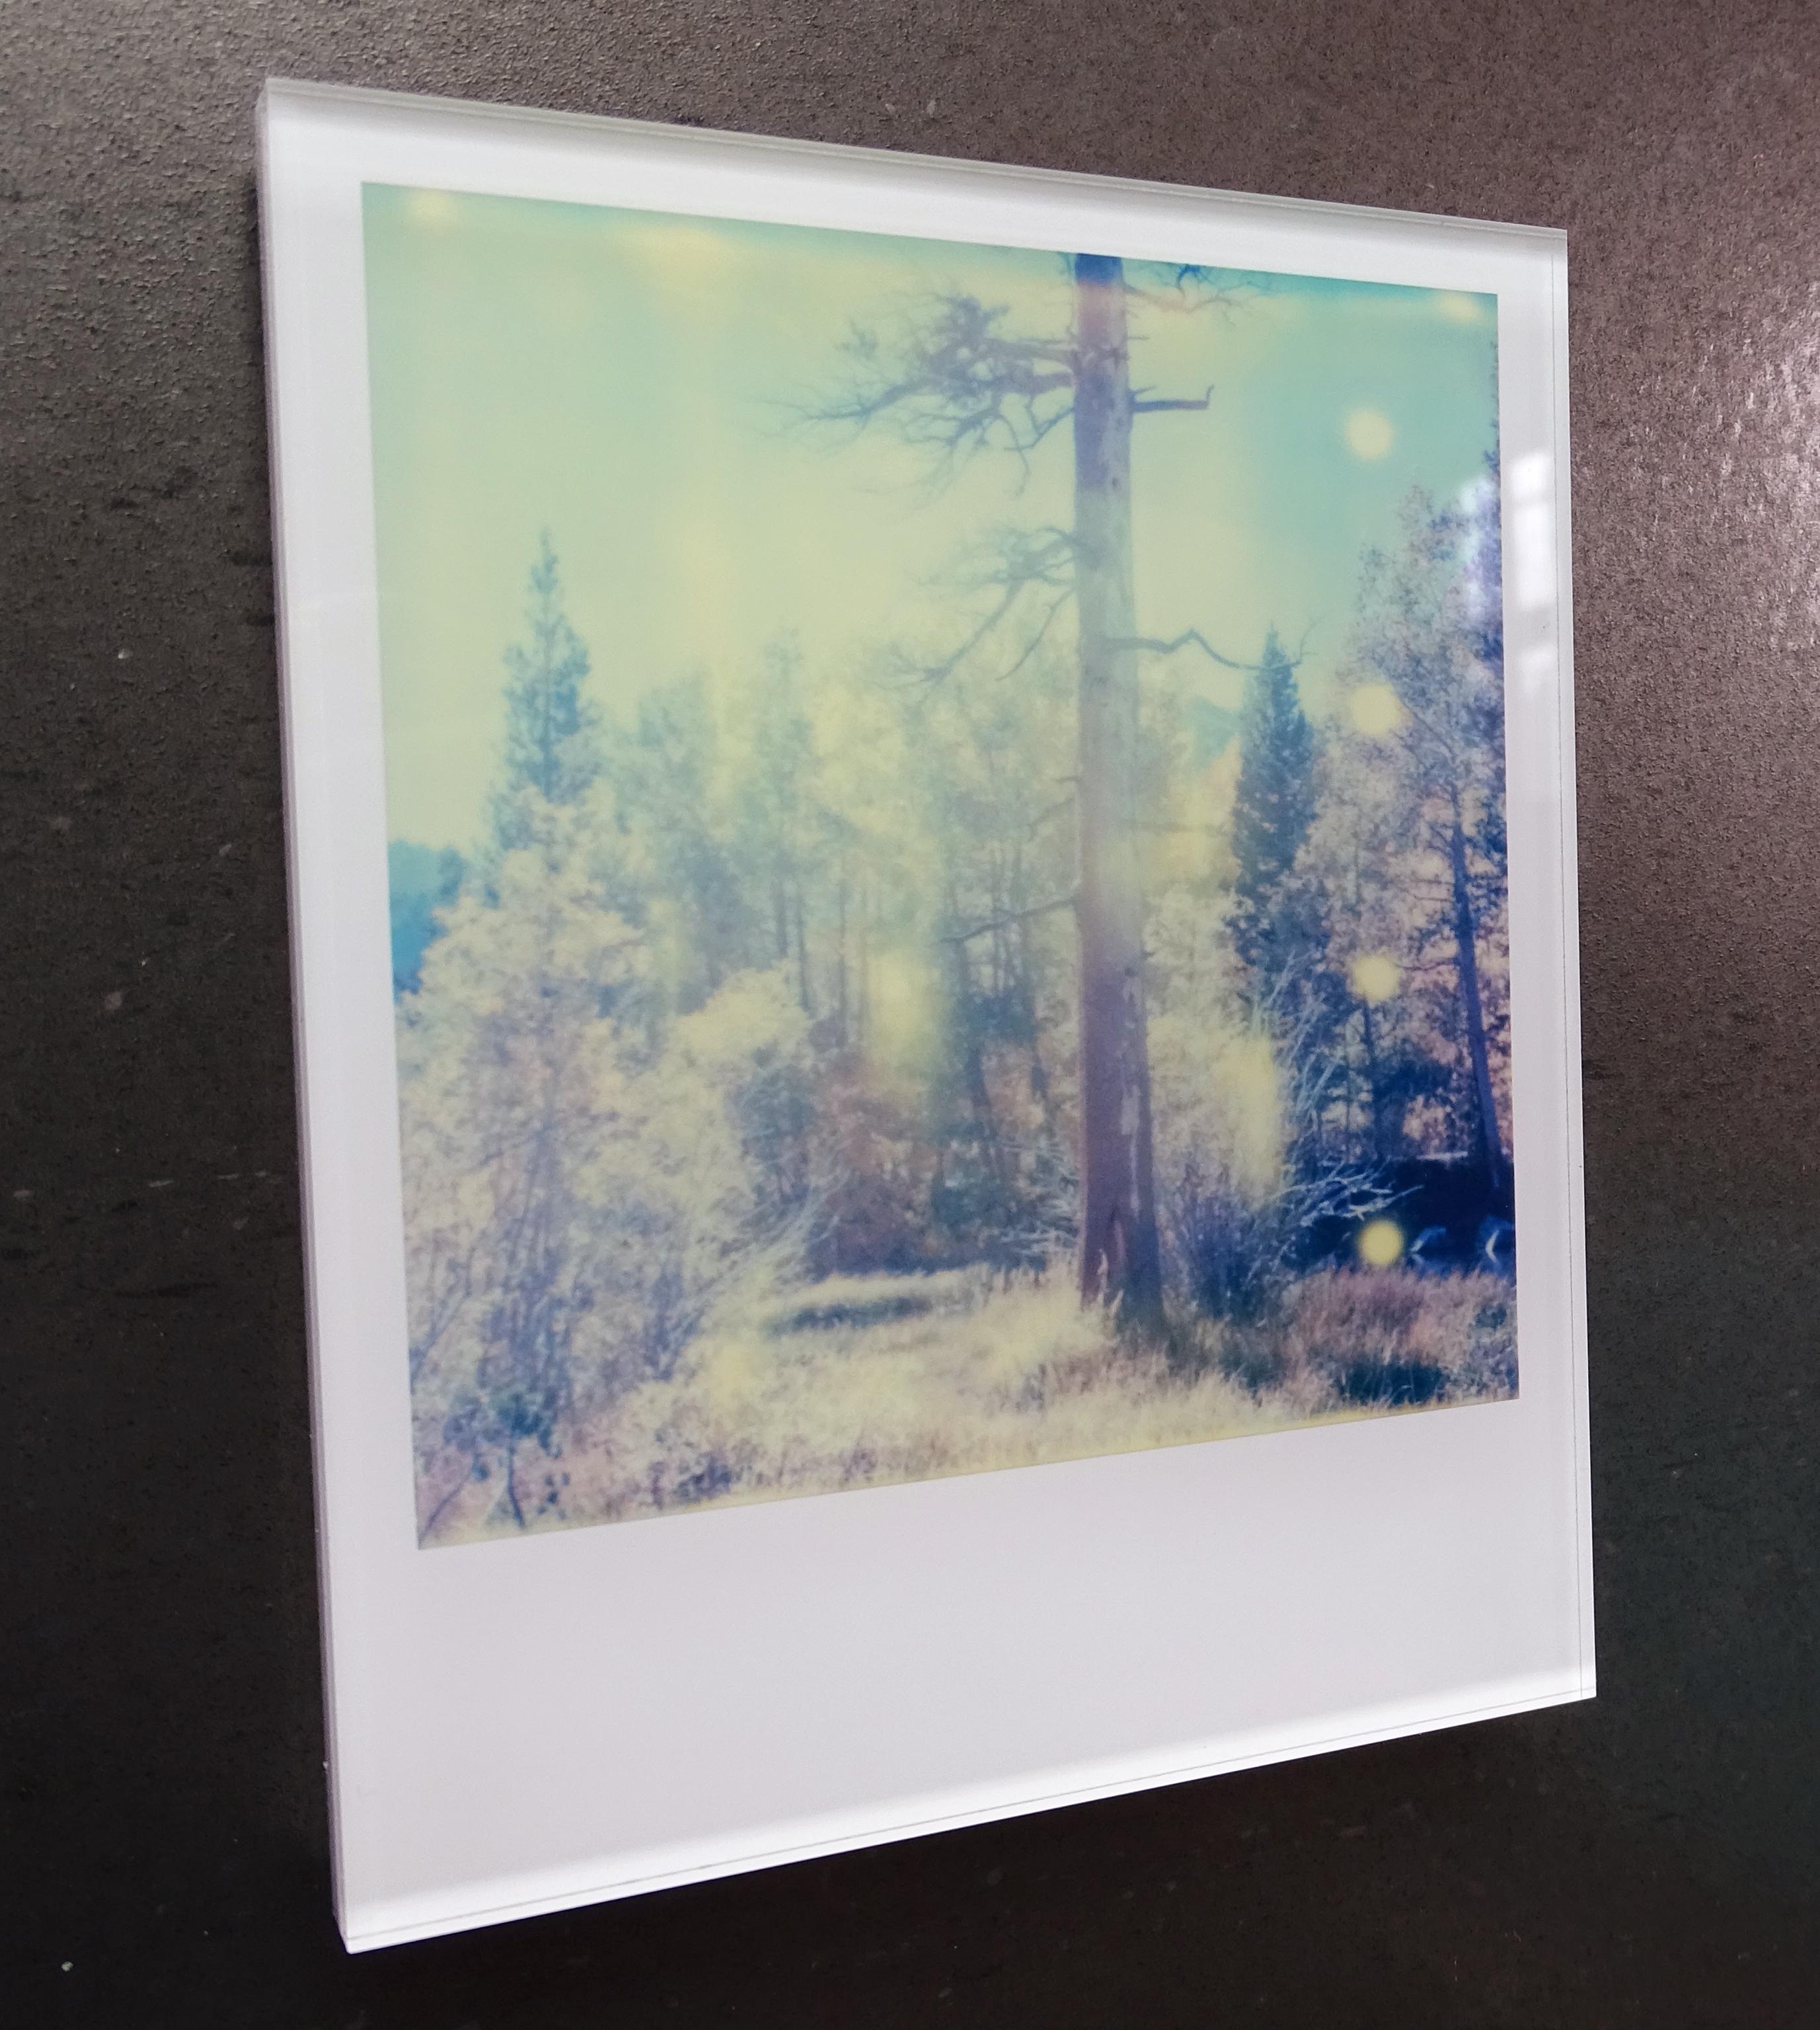 Stefanie Schneider's Minis
In the Range of Light (Wastelands), 2003

Signed and signature brand on verso.
Lambda digital Color Photographs based on a Polaroid.
Sandwiched in between Plexiglass (thickness 0.7cm)

Polaroid sized open Editions